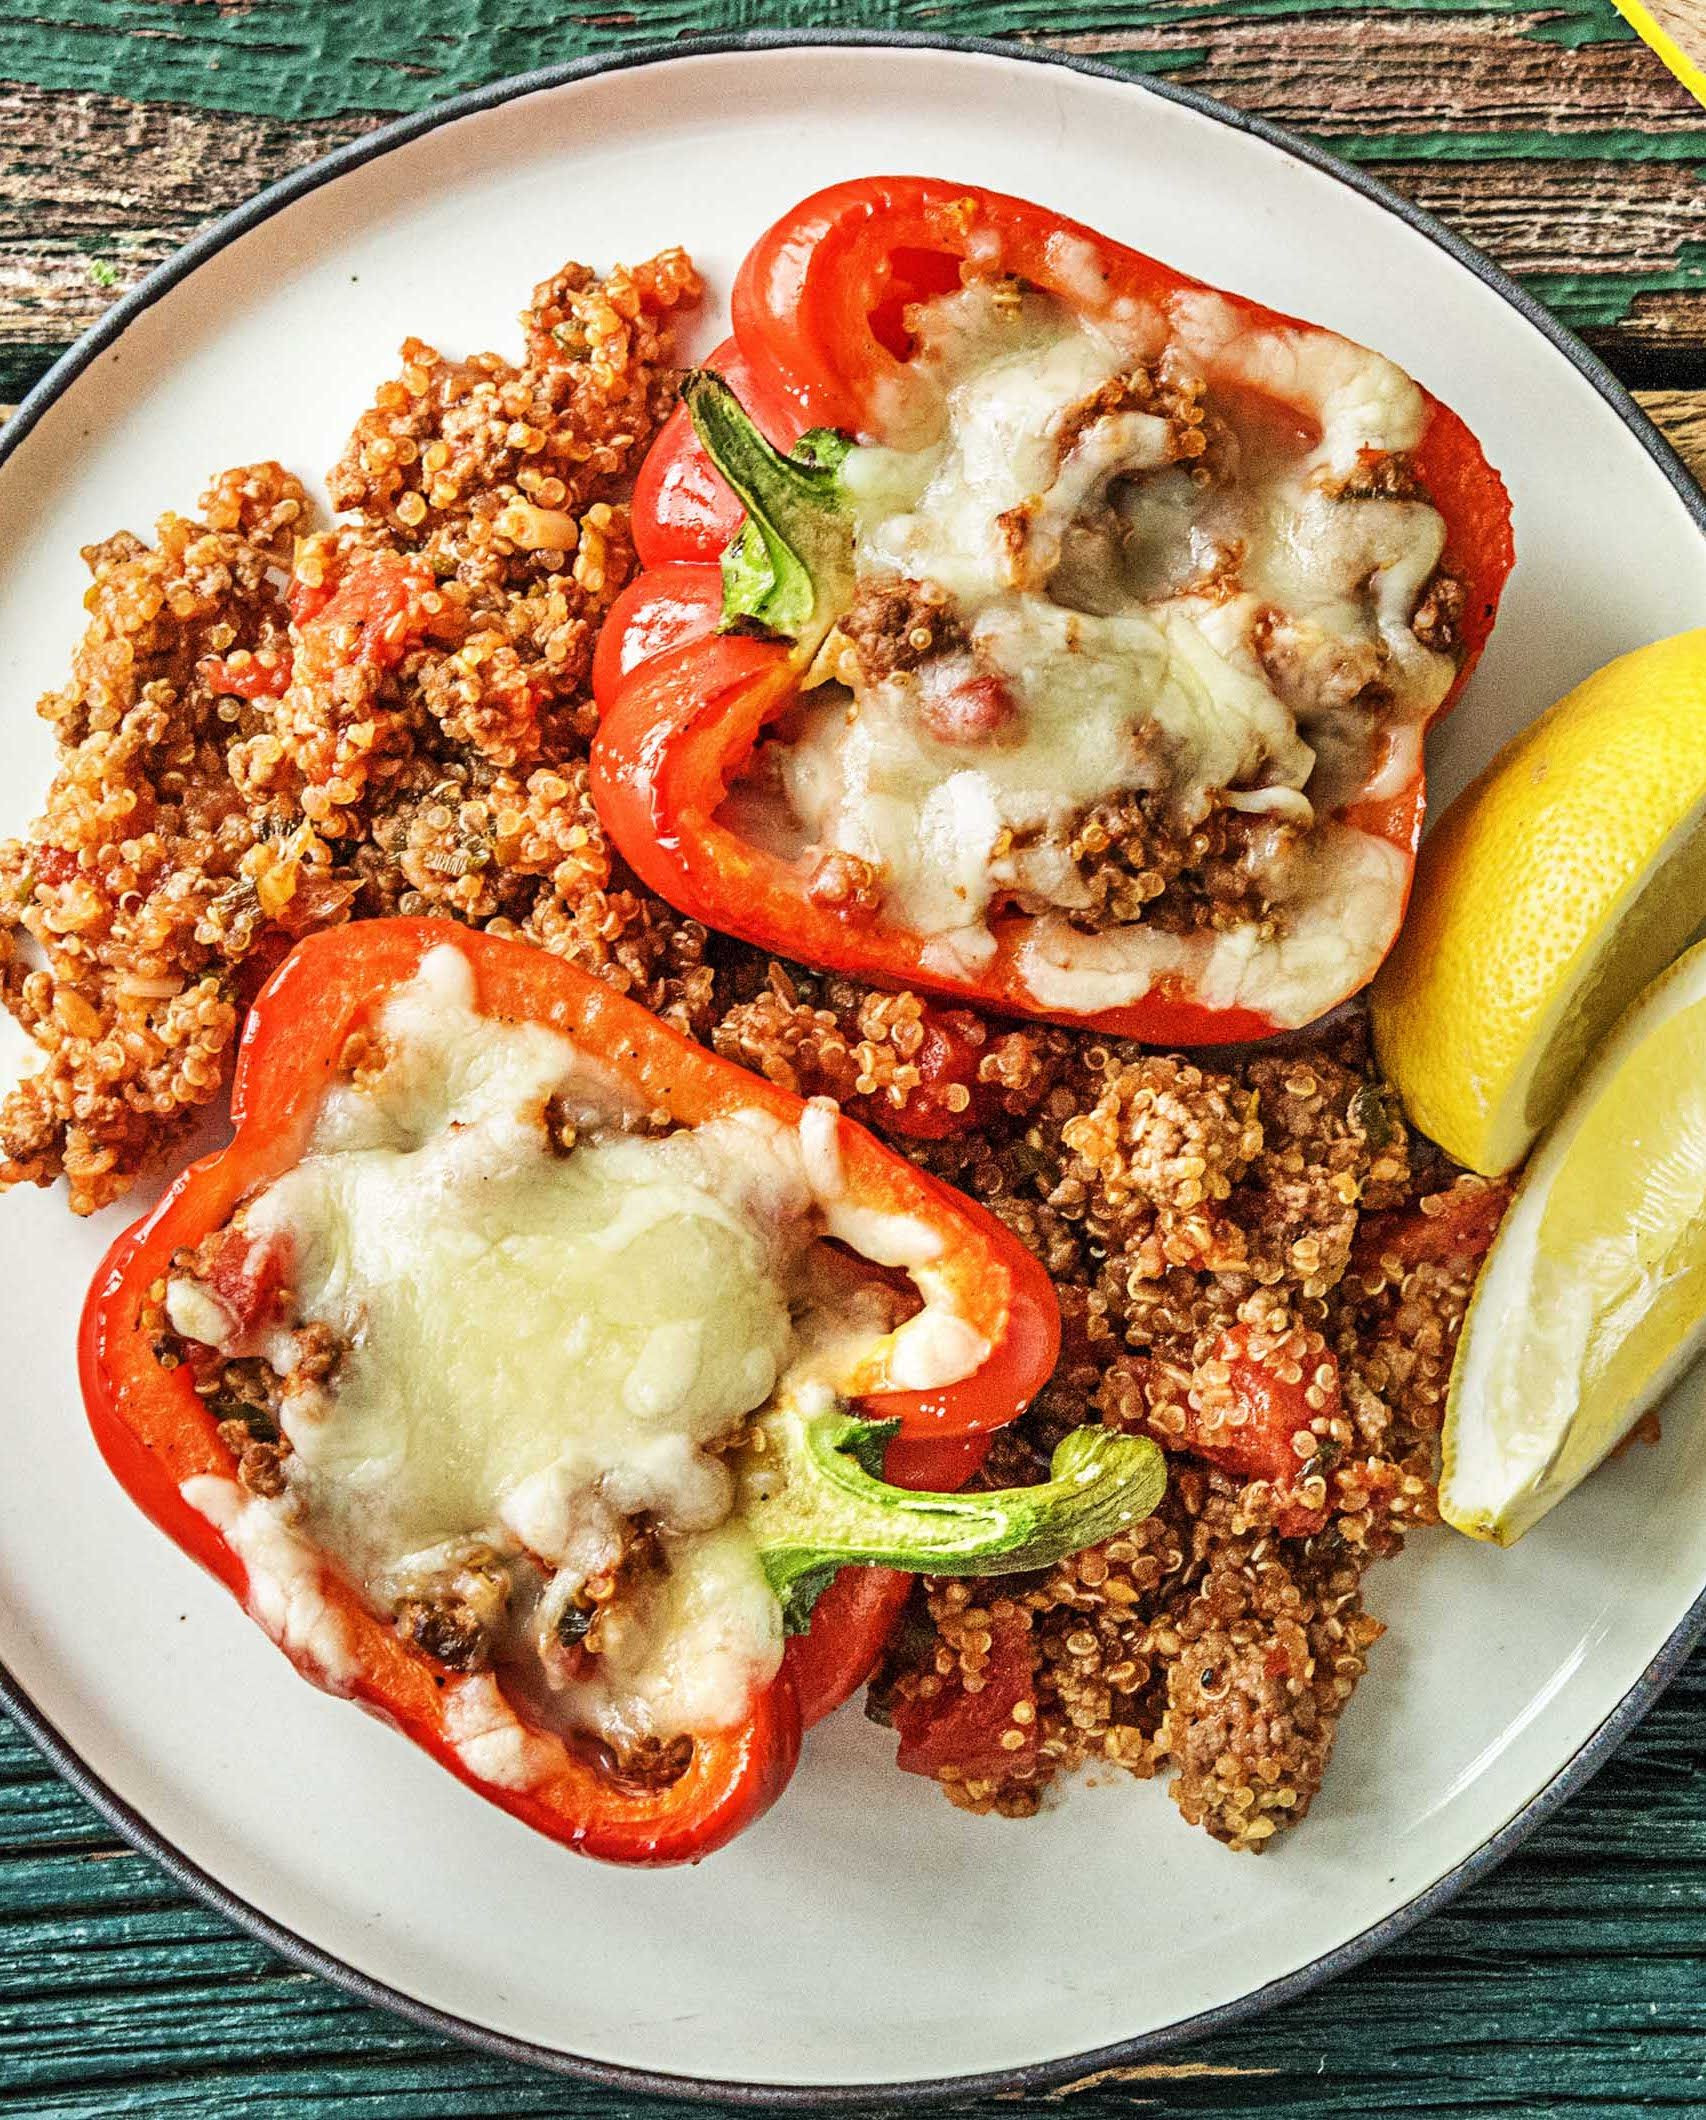 Quinoa And Beef Stuffed Peppers
 Healthy stuffed peppers with quinoa and ground beef